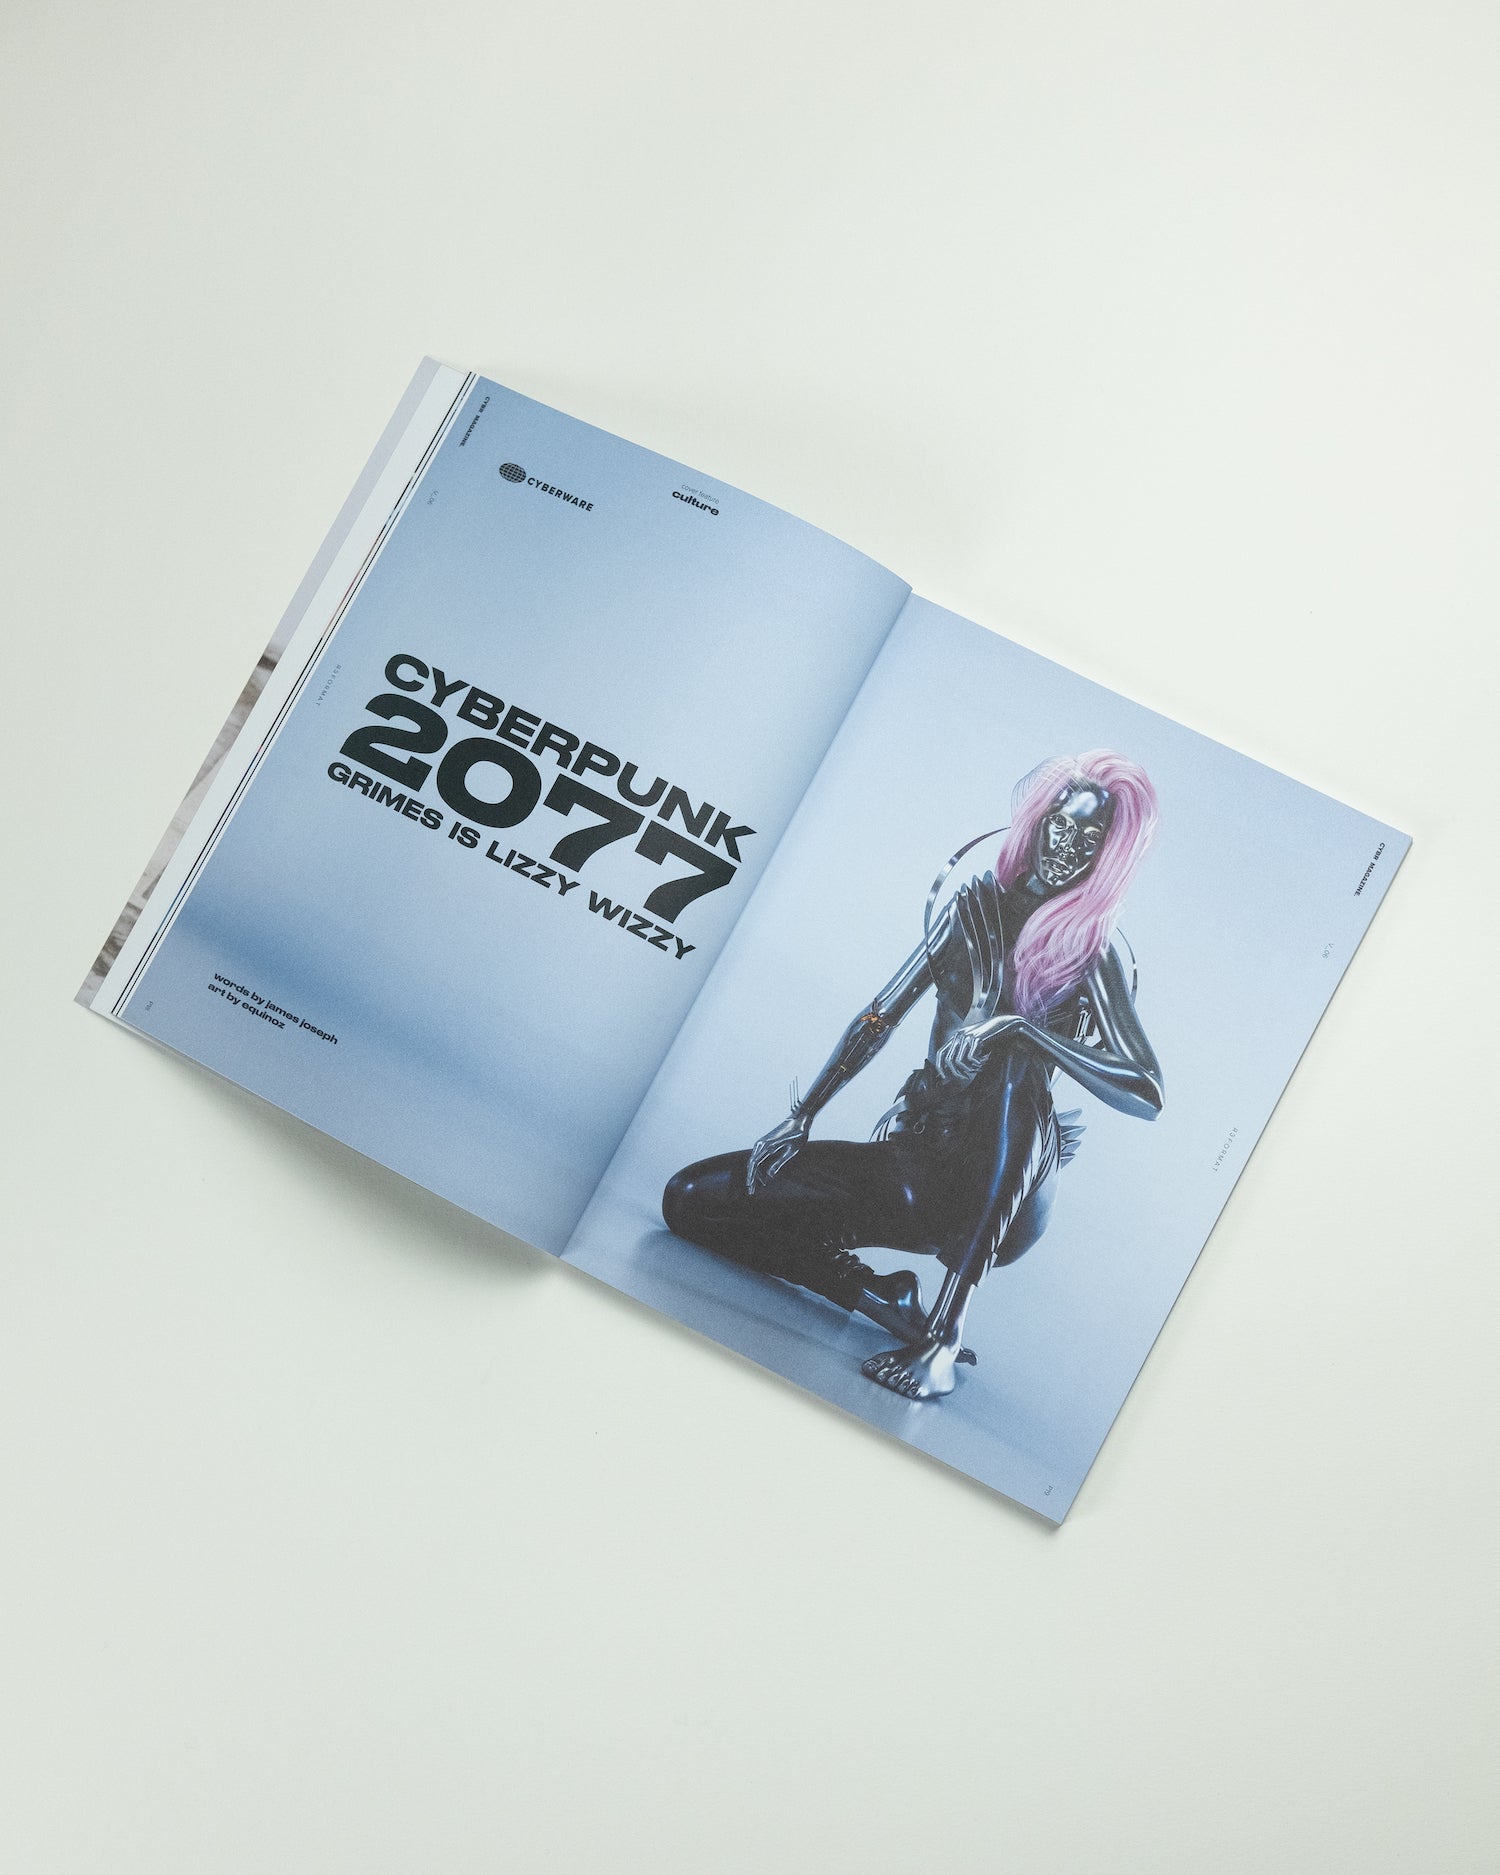 CYBR MAG 06 PRINT LIZZY WIZZY COLLECTOR'S EDITION